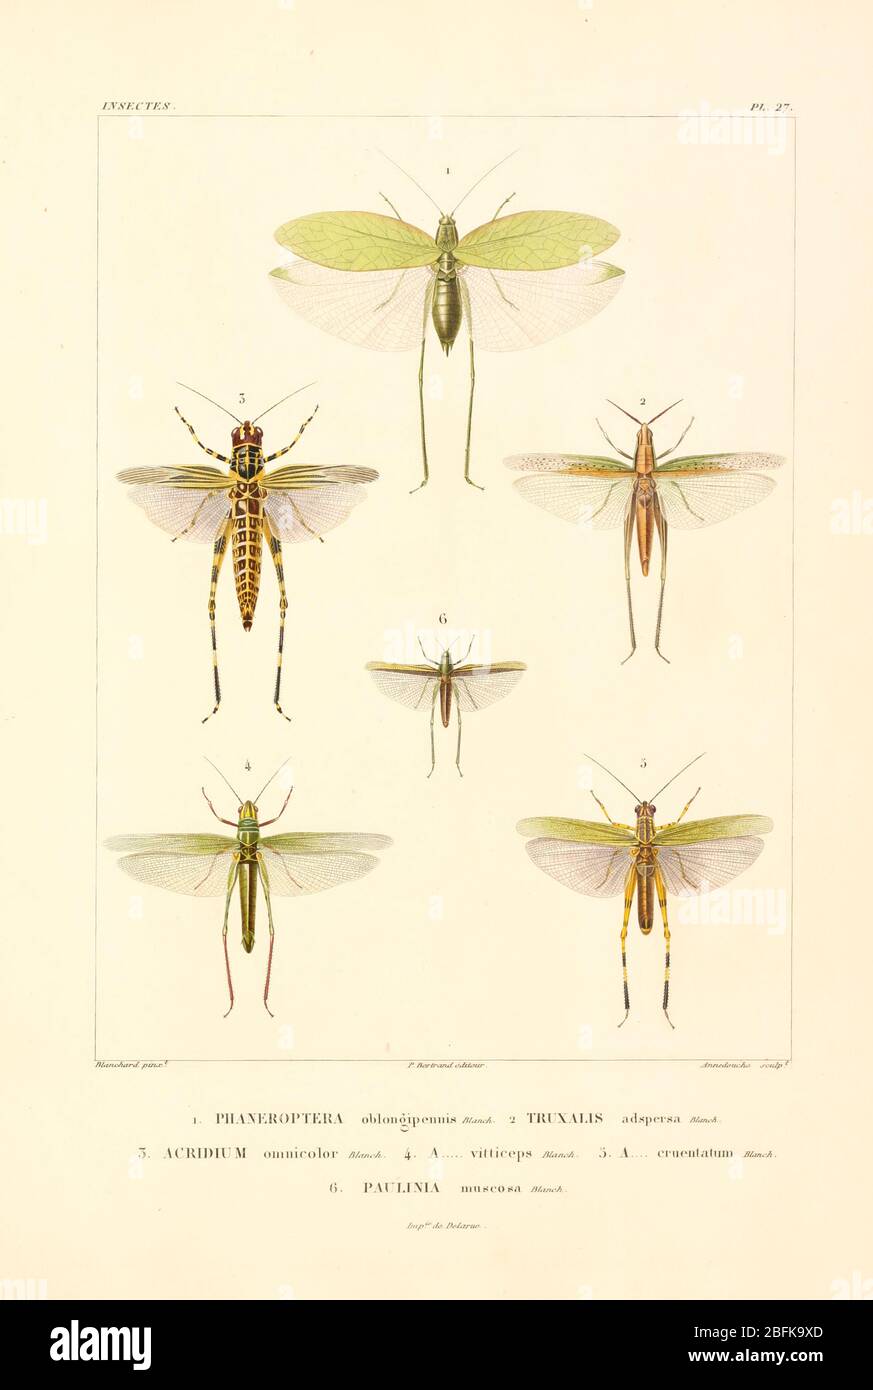 Insects of South America From the book 'Voyage dans l'Amérique Méridionale' [Journey to South America: (Brazil, the eastern republic of Uruguay, the Argentine Republic, Patagonia, the republic of Chile, the republic of Bolivia, the republic of Peru), executed during the years 1826 - 1833] By: Orbigny, Alcide Dessalines d', 1802-1857; Montagne, Jean François Camille, 1784-1866; Martius, Karl Friedrich Philipp von, 1794-1868 Published Paris :Chez Pitois-Levrault et c.e ... ;1835-1847 Stock Photo